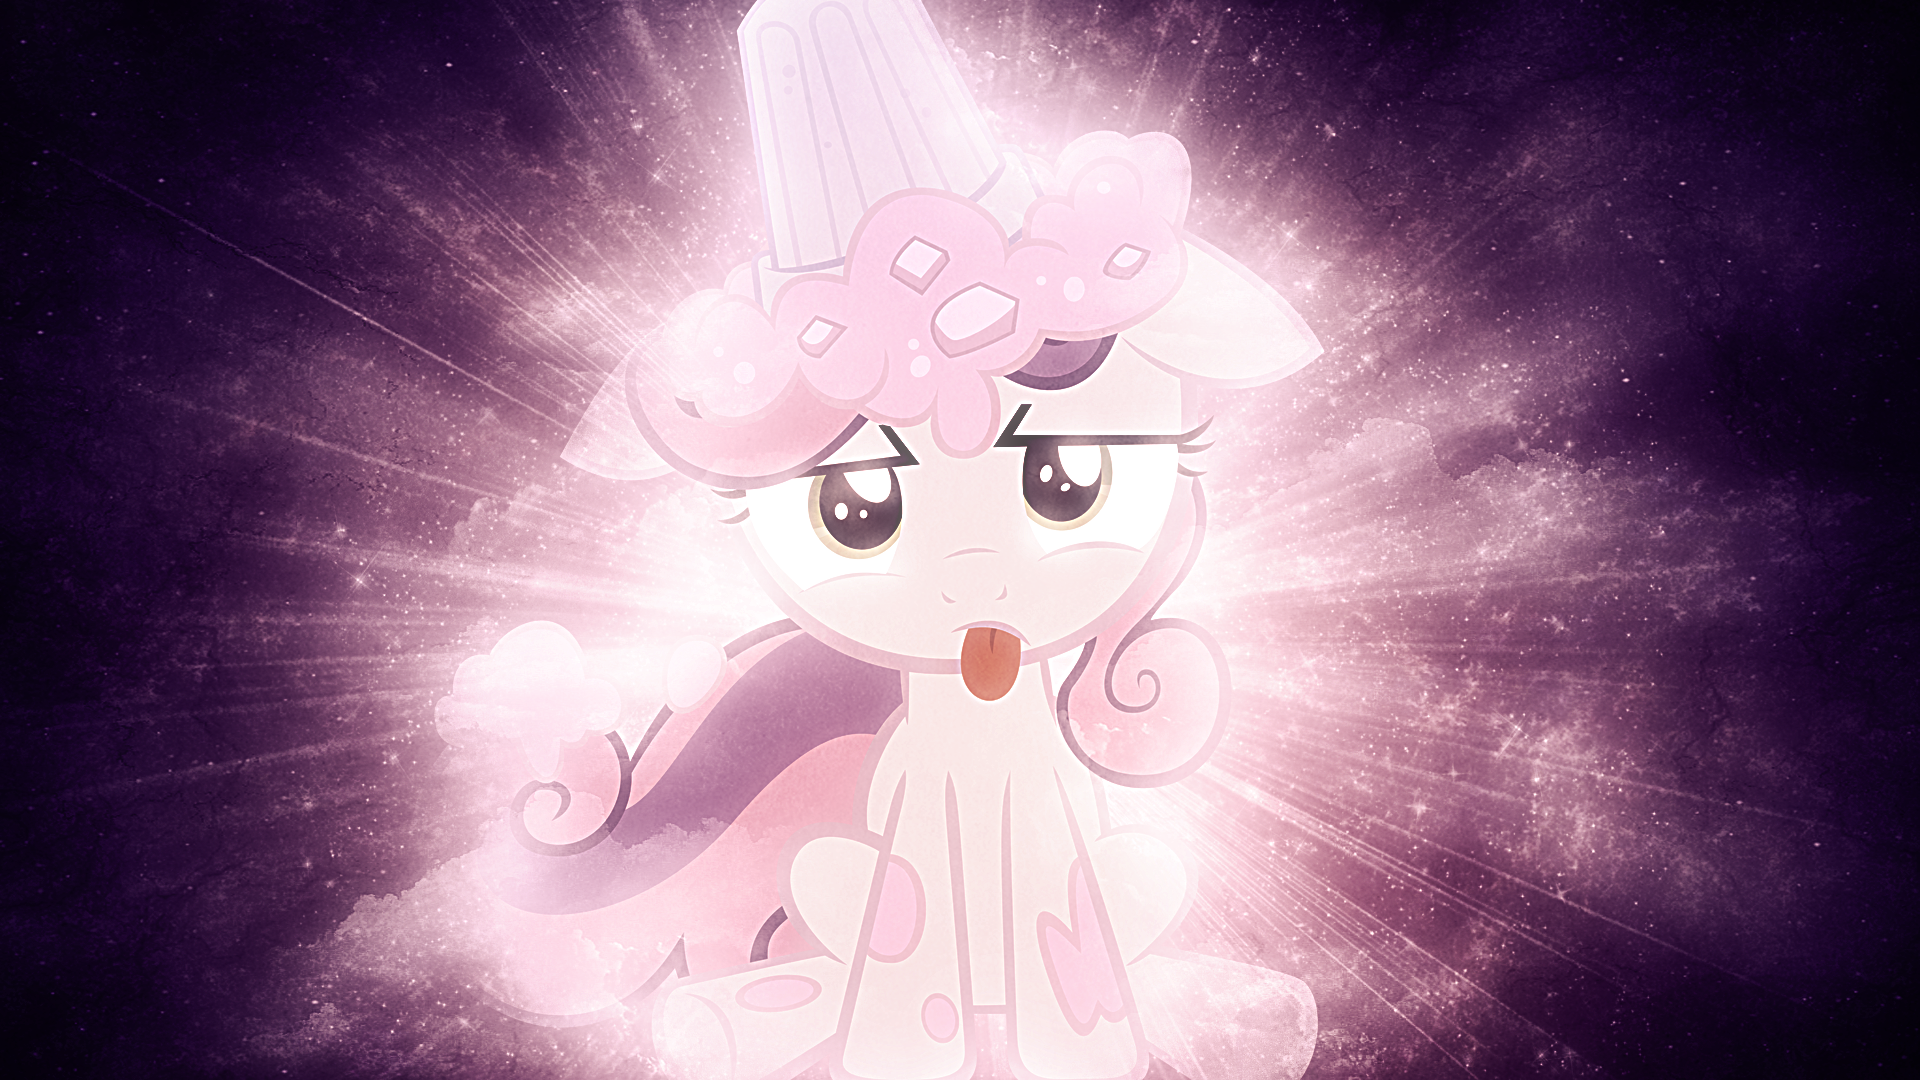 Smoothie Belle Needs A Bath - Wallpaper by PhantomBadger and Tzolkine